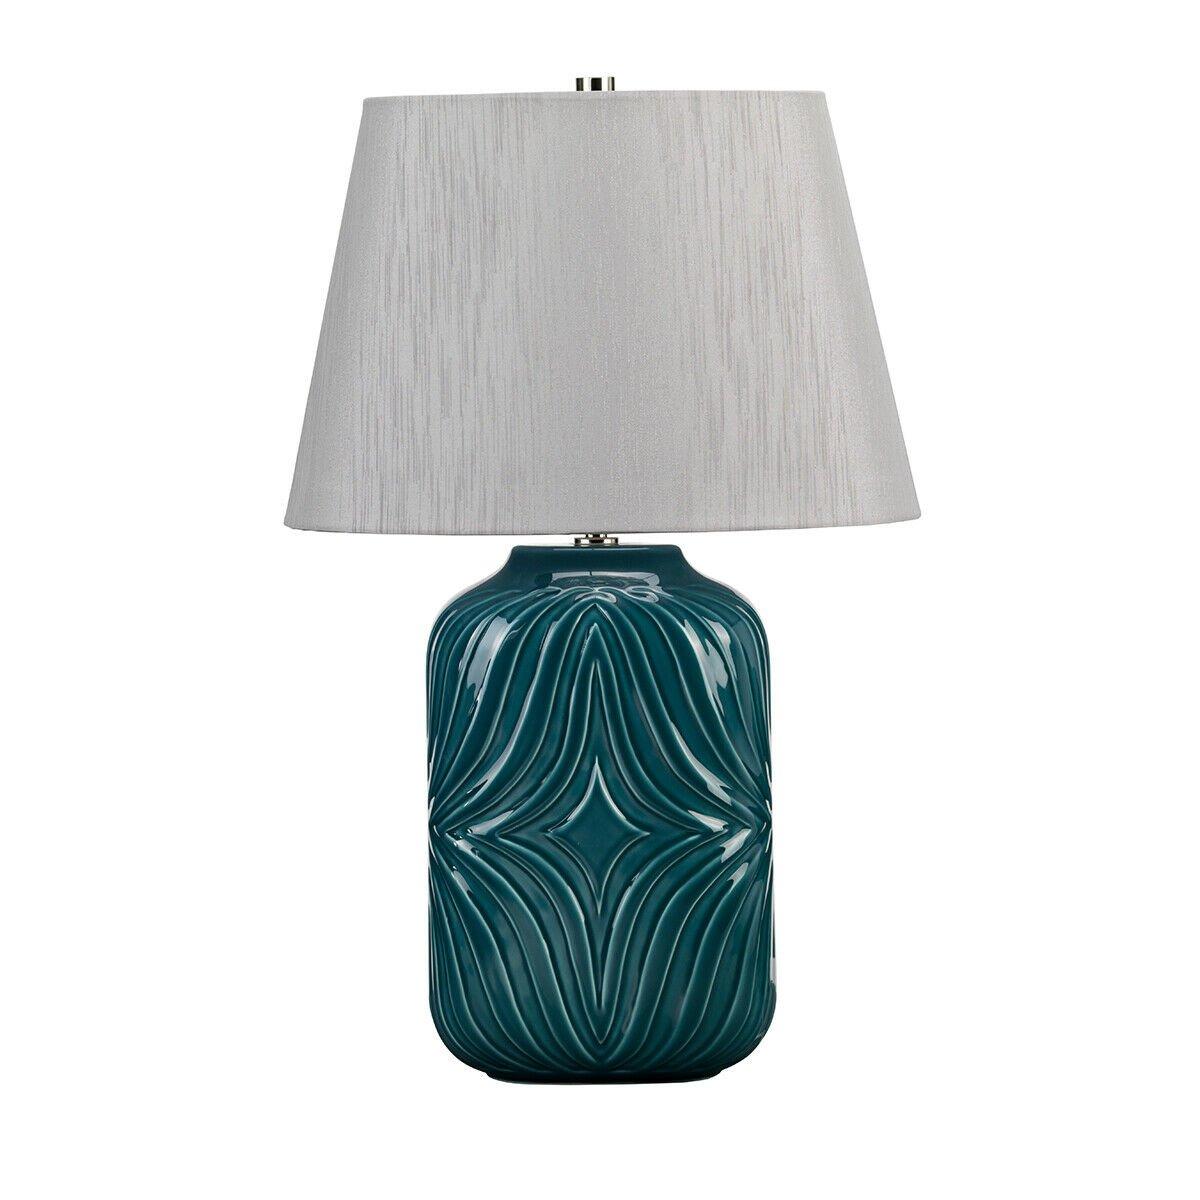 Table Lamp Diamond Sculpted Pattern Turquoise Glaze Grey Shade LED E27 60W